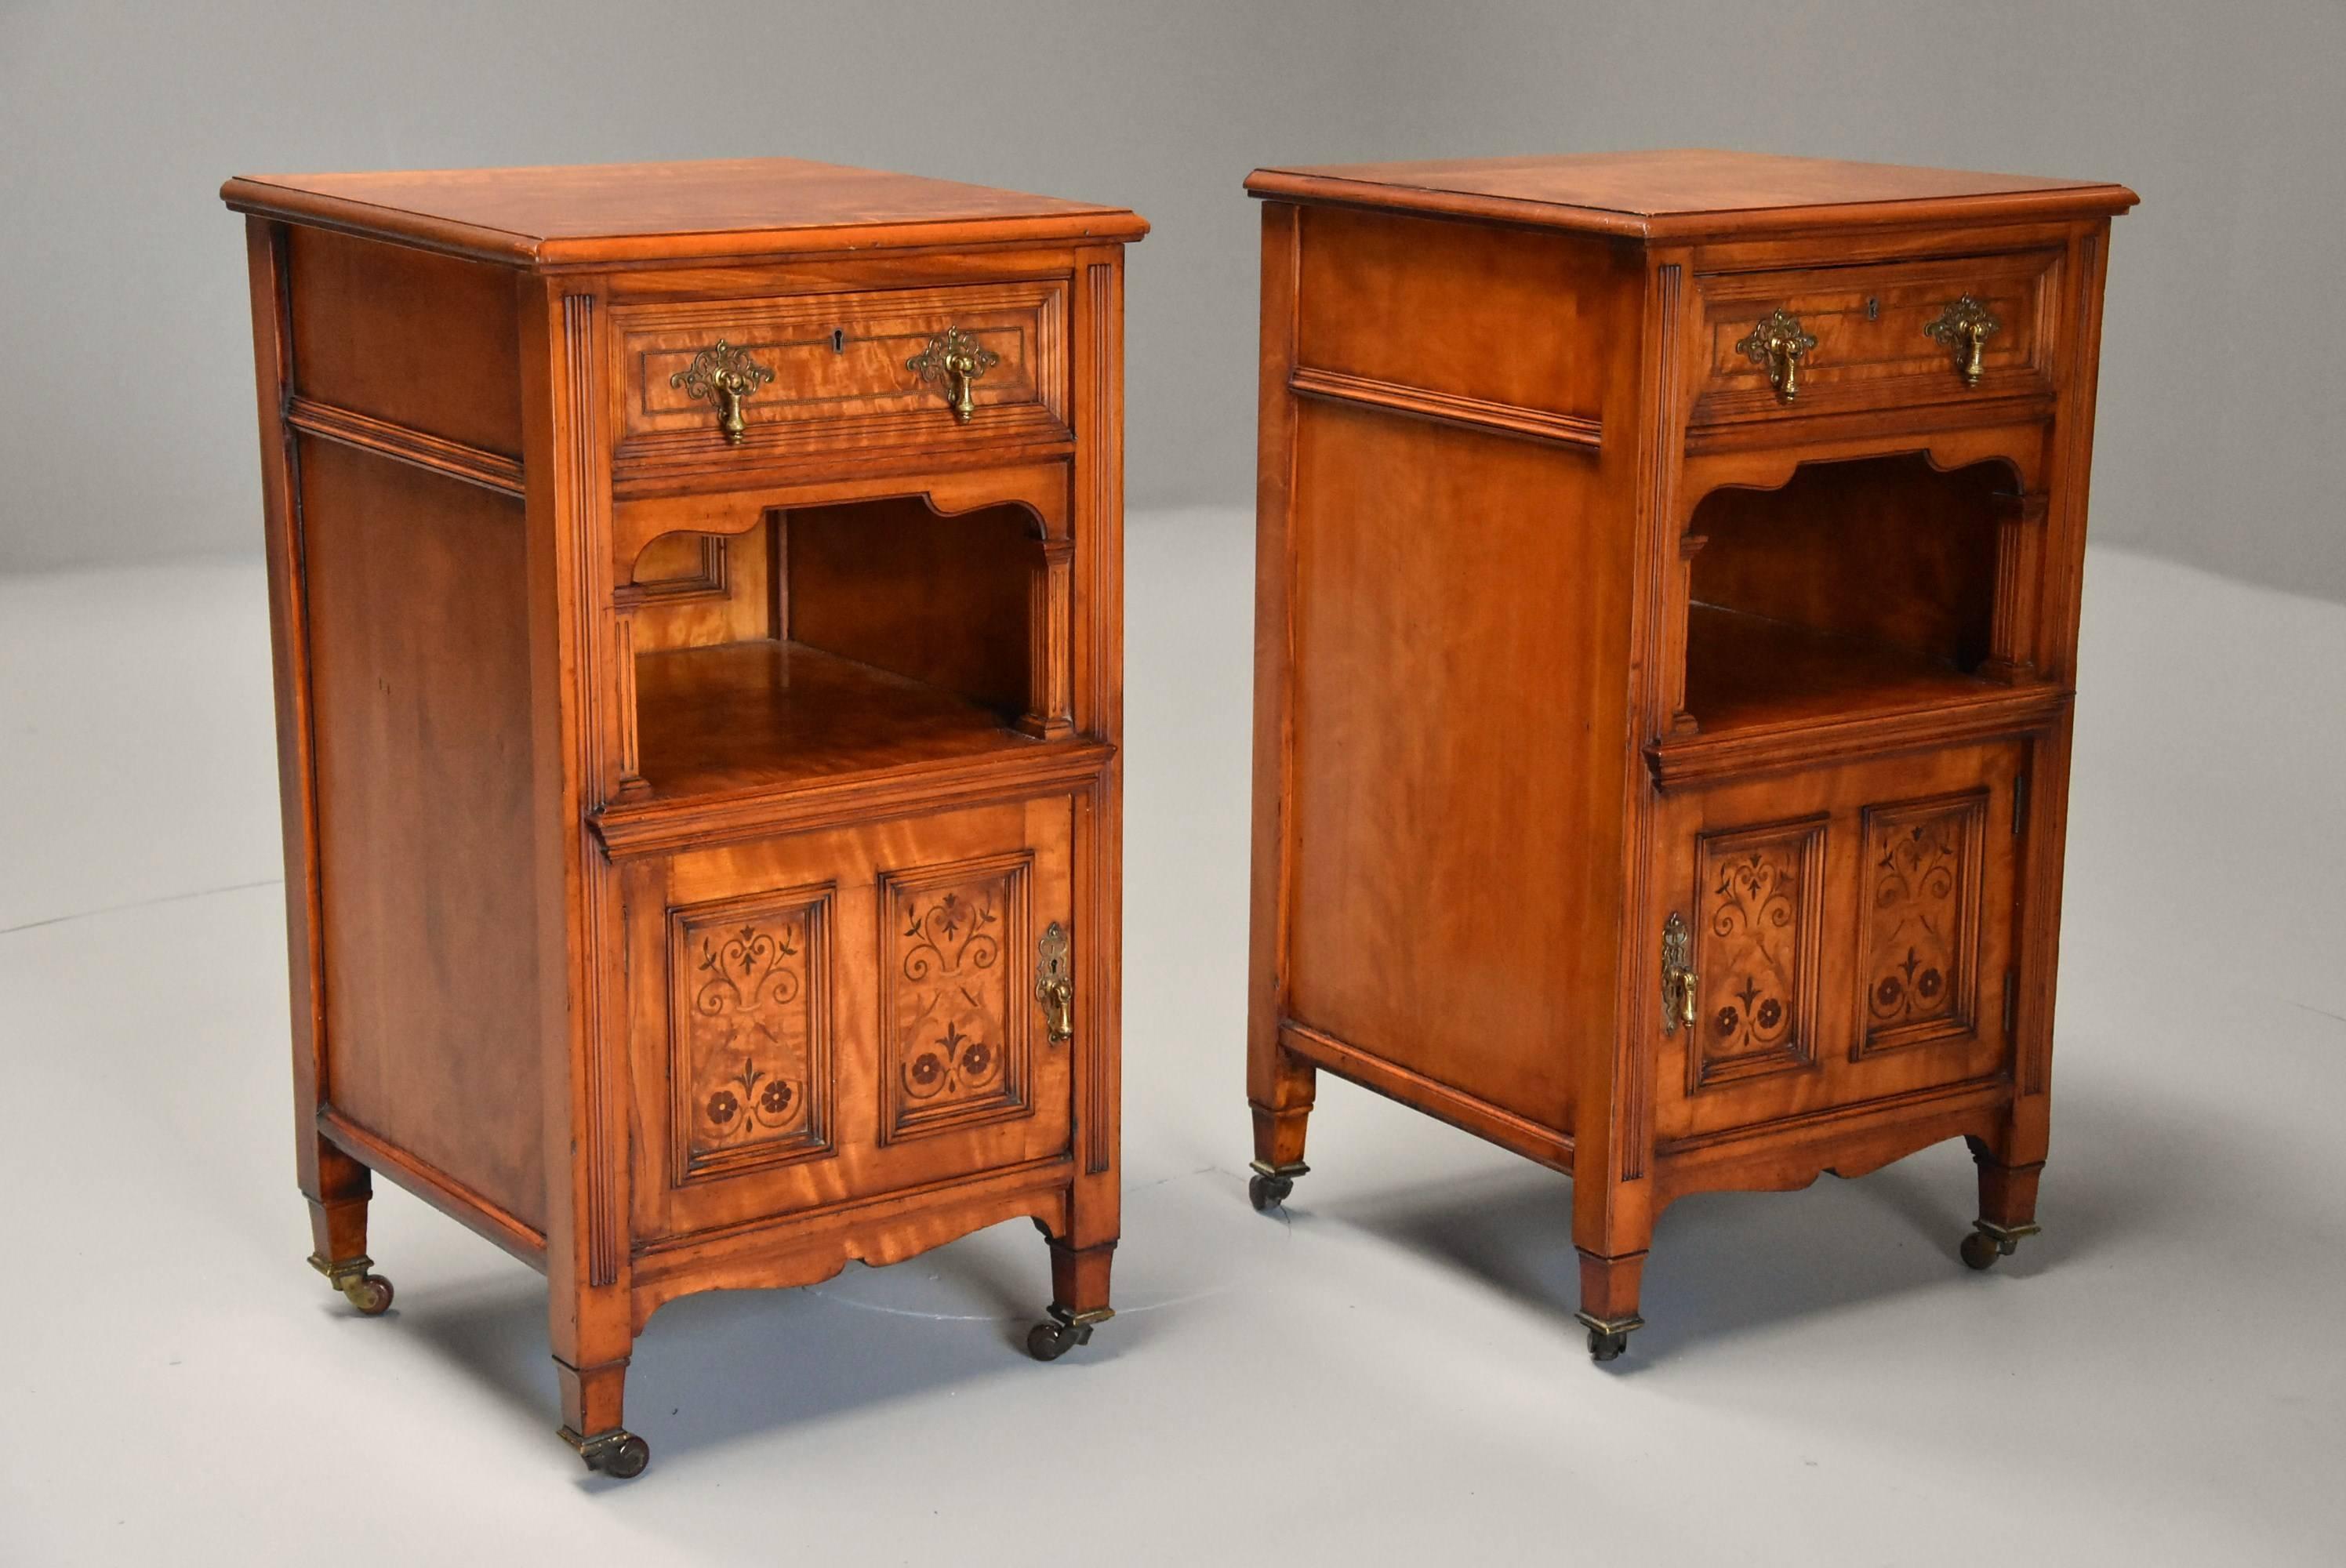 A pair of late 19th century satin birch bedside cabinets with influences of the Aesthetic Movement. 

This pair of cabinets consist of satin birch tops with a moulded edge leading down to a mahogany lined drawer, the drawer fronts with a moulding